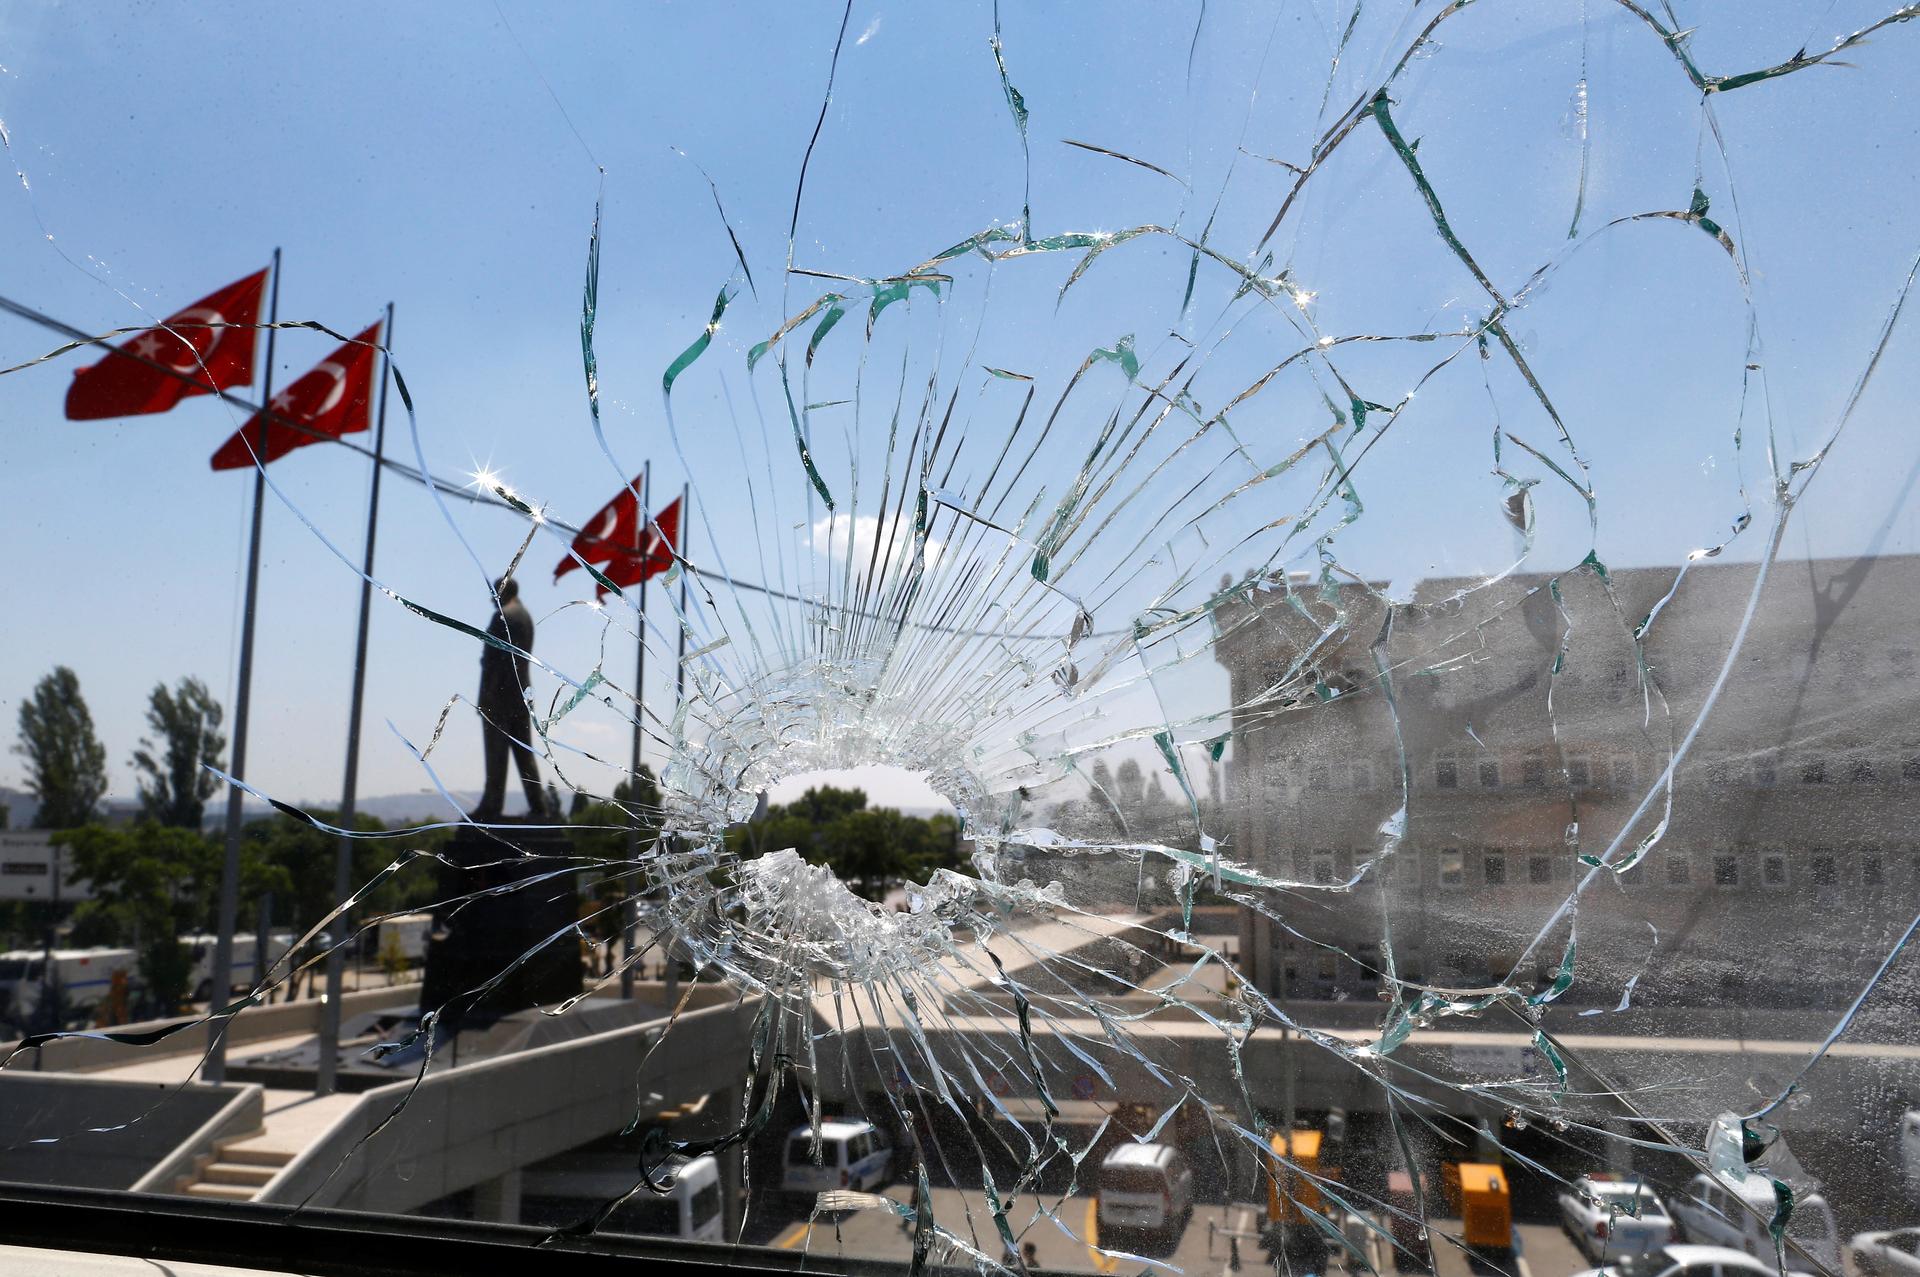 A damaged window is pictured at the police headquarters in Ankara, Turkey, July 18, 2016. REUTERS/Osman Orsal